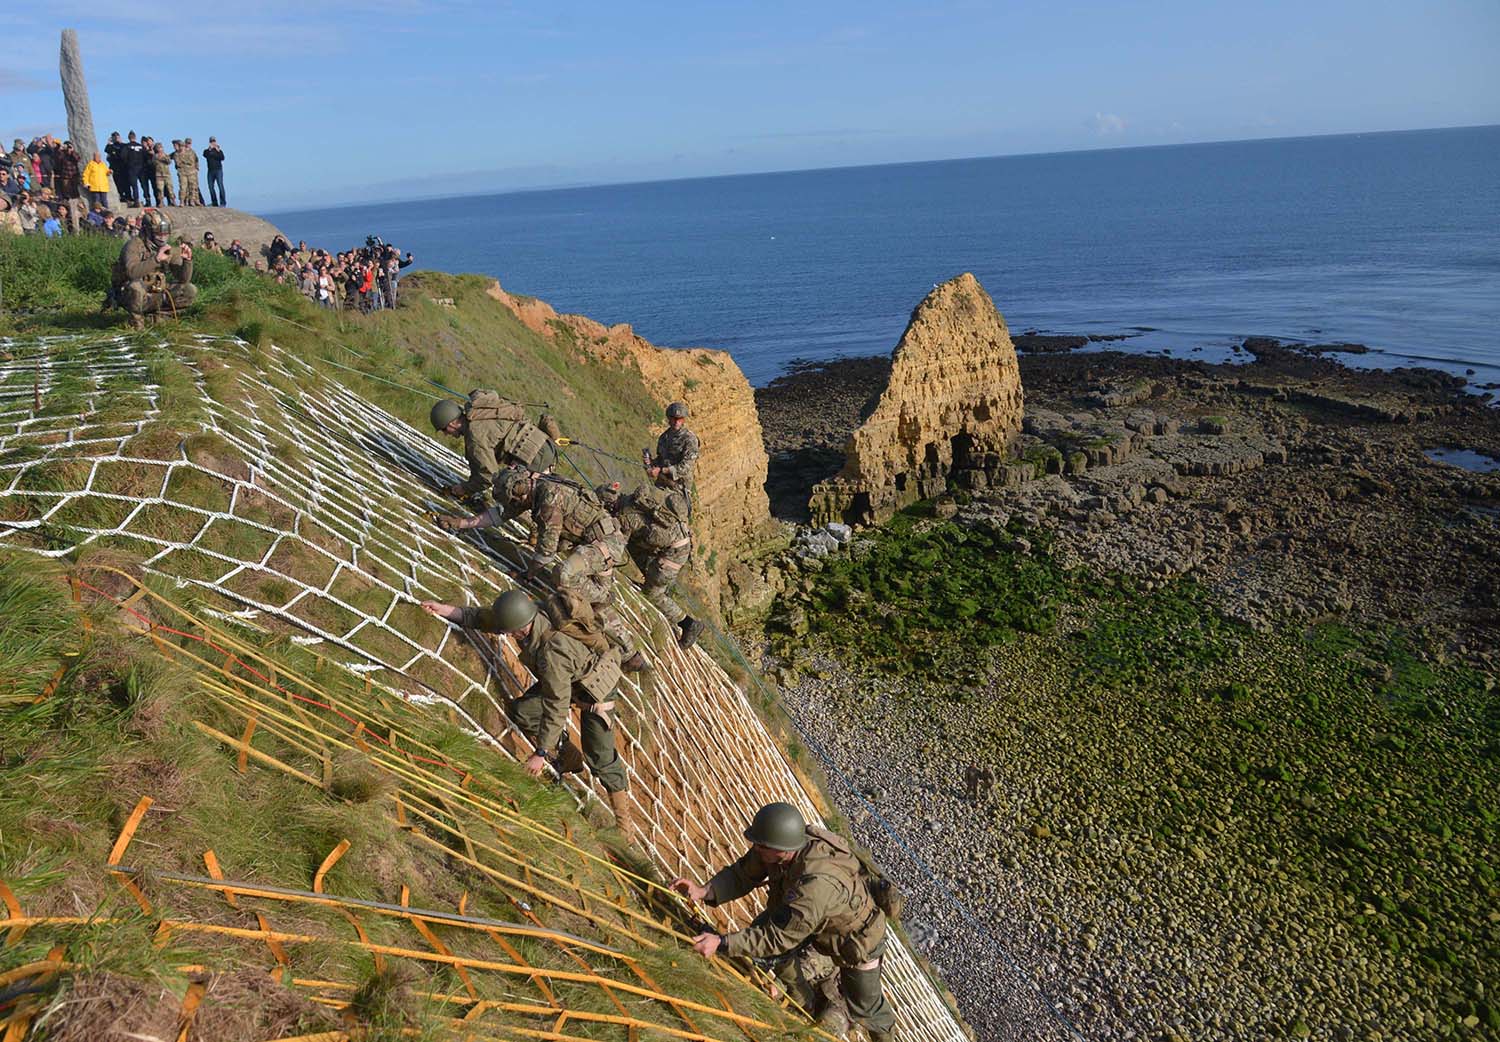 Today S Rangers Scale Normandy Cliff In Honor Of One D Day